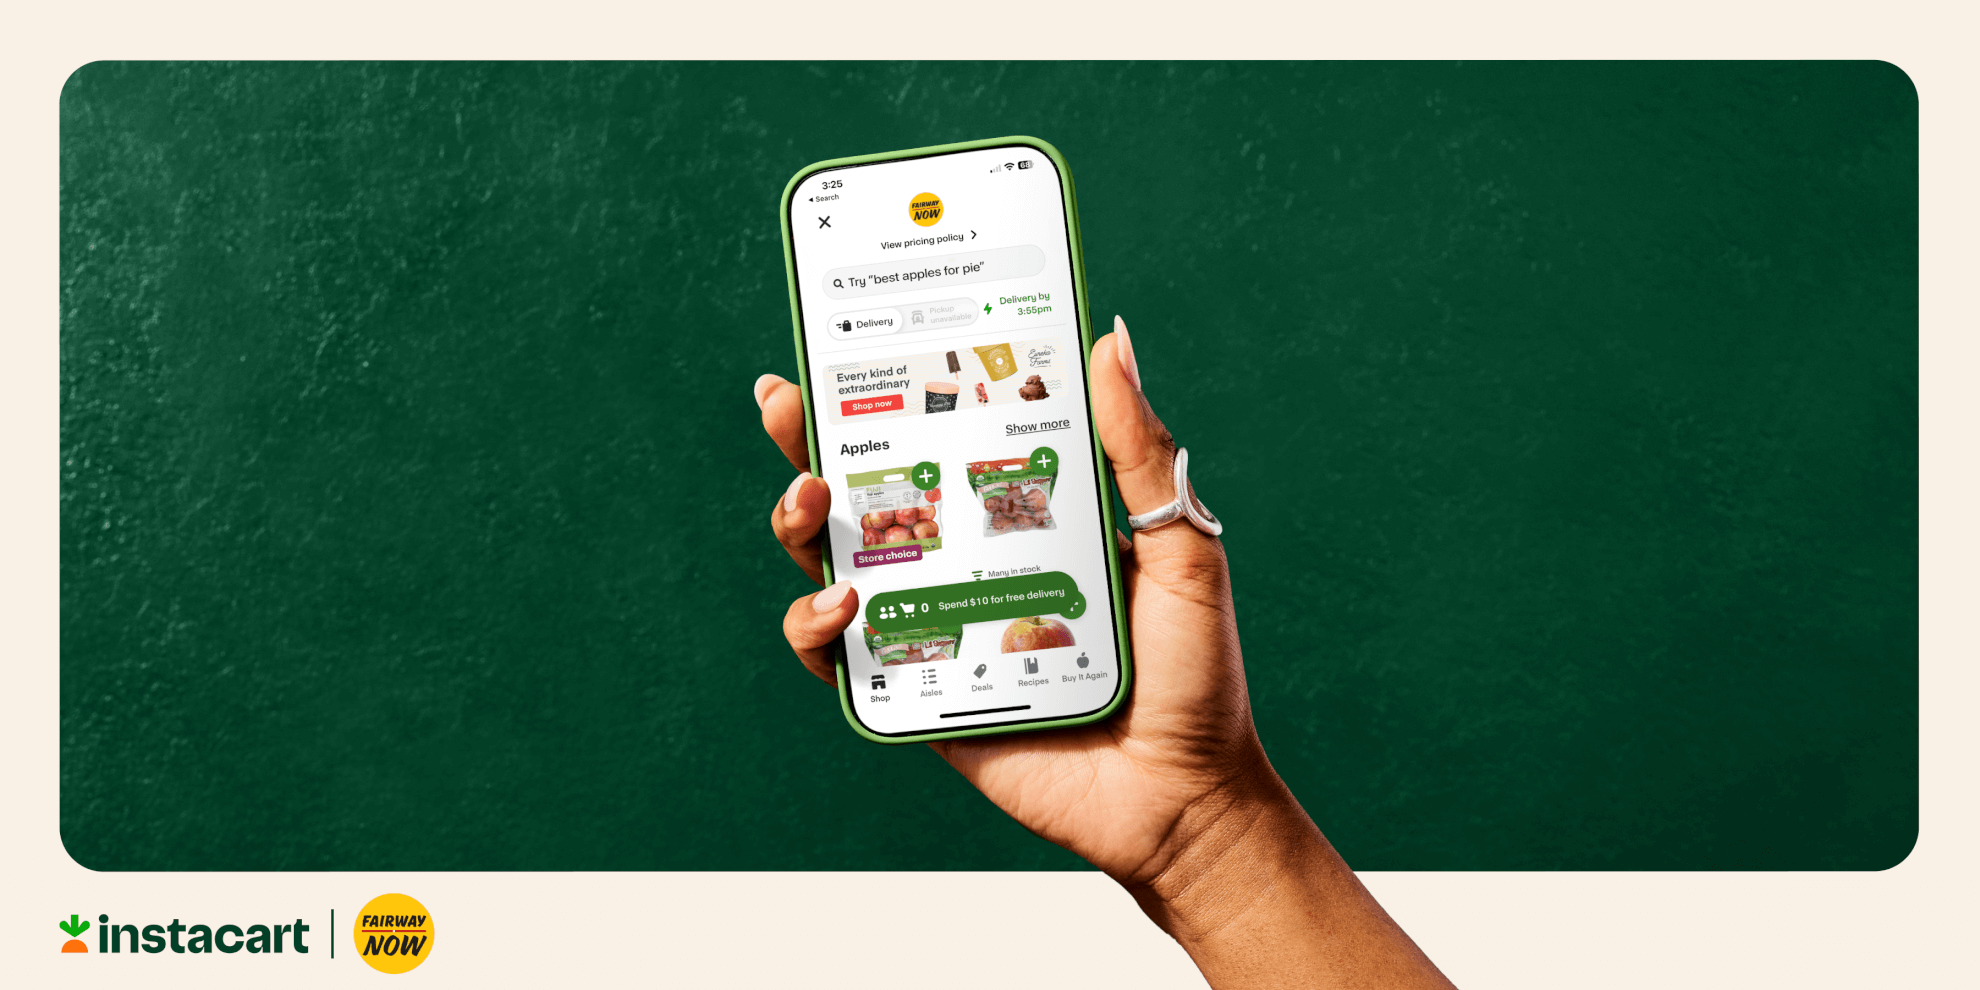 Instacart adds safety enhancements for its shoppers